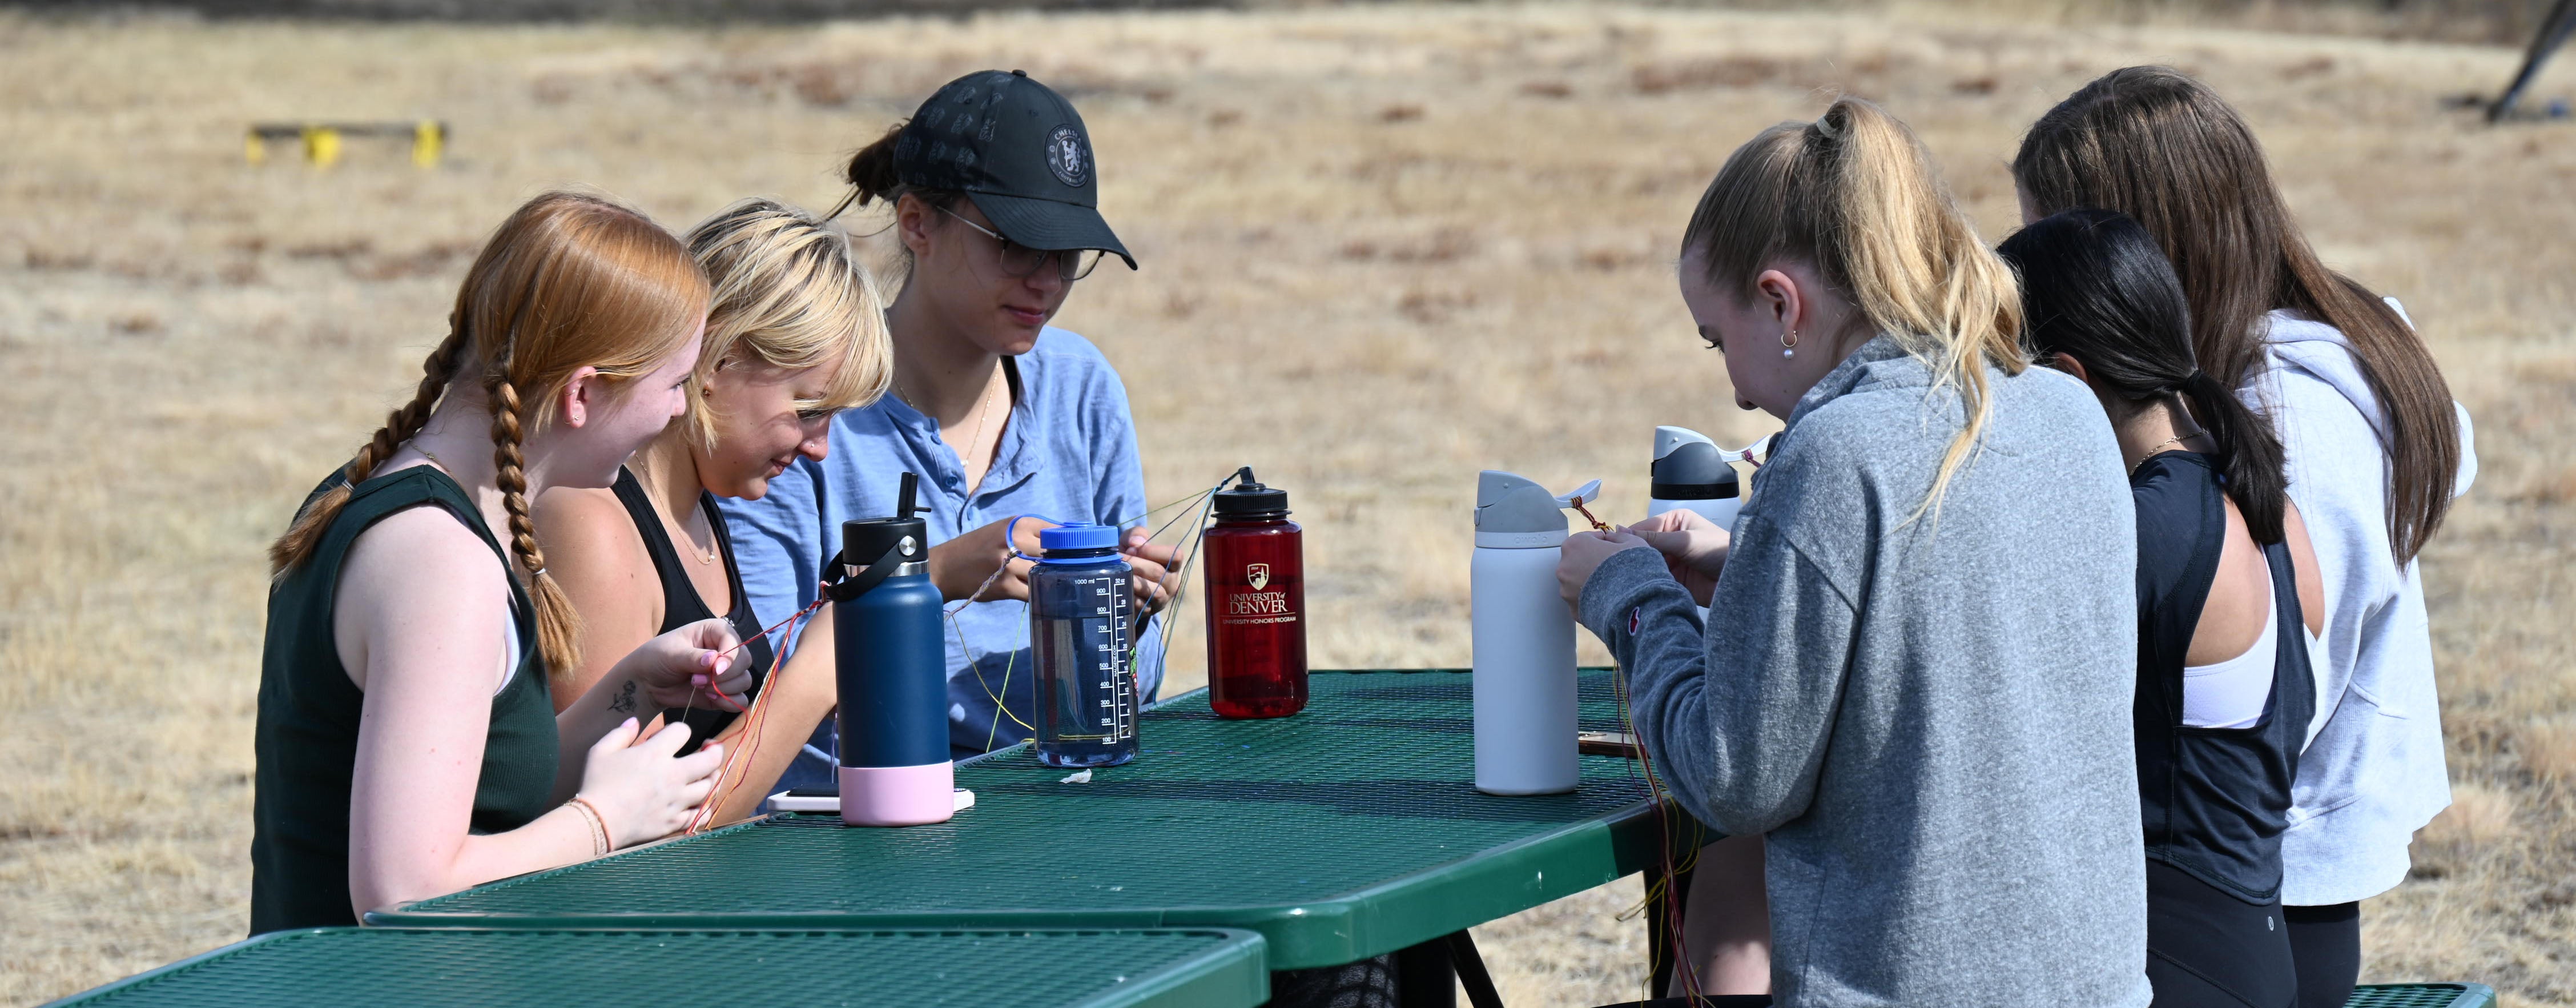 students gathered at picnic table in the meadow